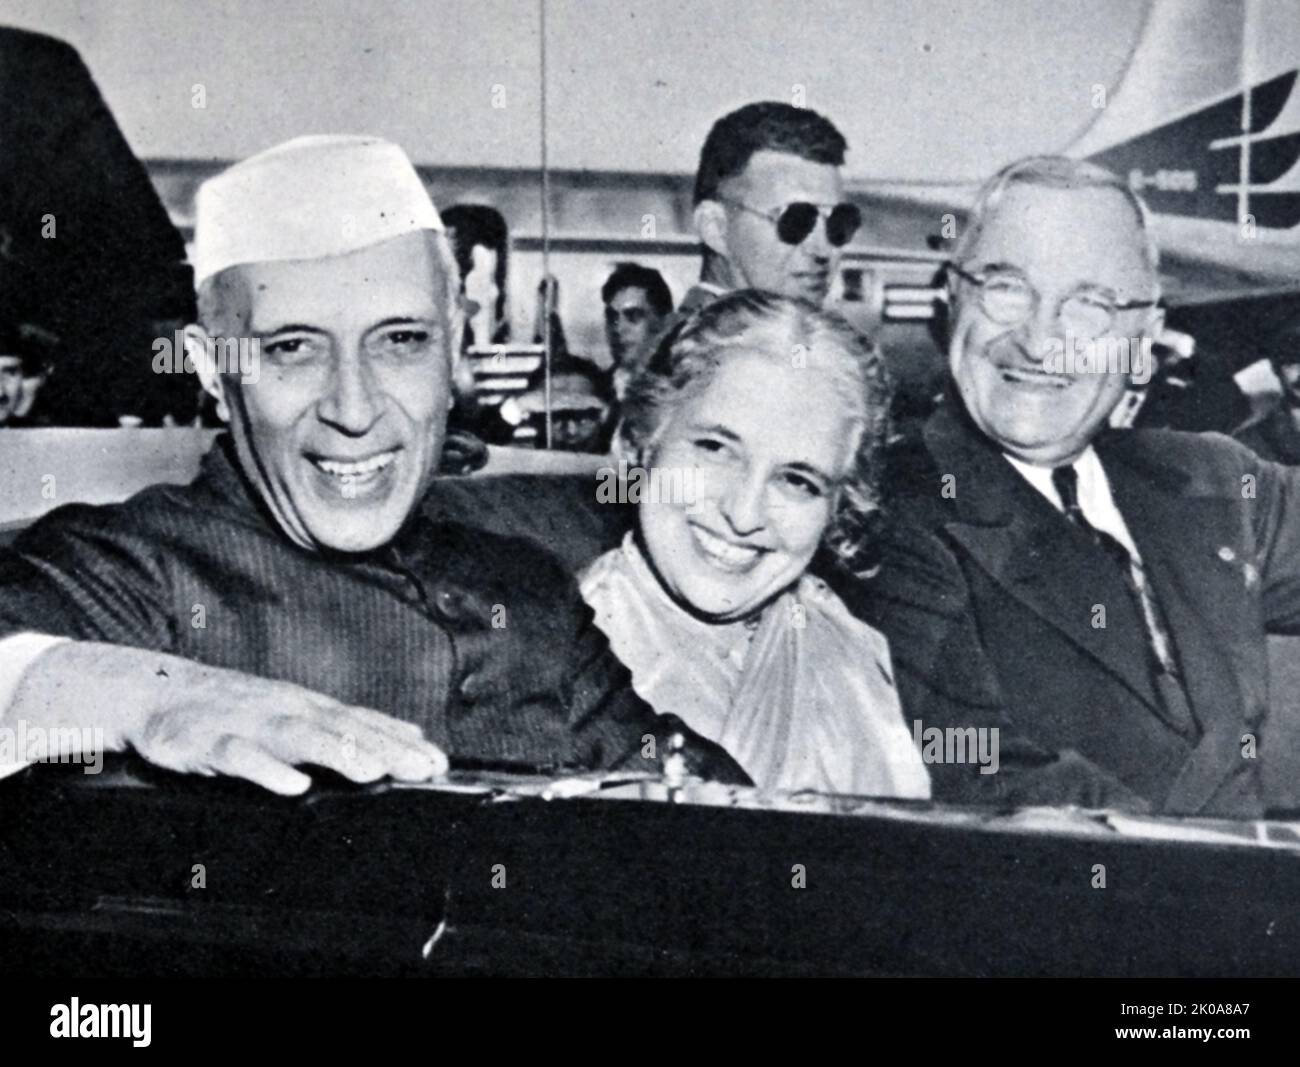 Indian prime minister Jawaharlal Nehru with his sister, and President Truman in Washington. Jawaharlal Nehru (14 November 1889 - 27 May 1964) was an Indian anti-colonial nationalist, secular humanist, social democrat, and author. Nehru was a principal leader of the Indian nationalist movement in the 1930s and 1940s. Upon India's independence in 1947, he served as the country's prime minister for 17 years. Harry S. Truman (May 8, 1884 - December 26, 1972) was the 33rd president of the United States, serving from 1945 to 1953. A lifetime member of the Democratic Party, he previously served as a Stock Photo